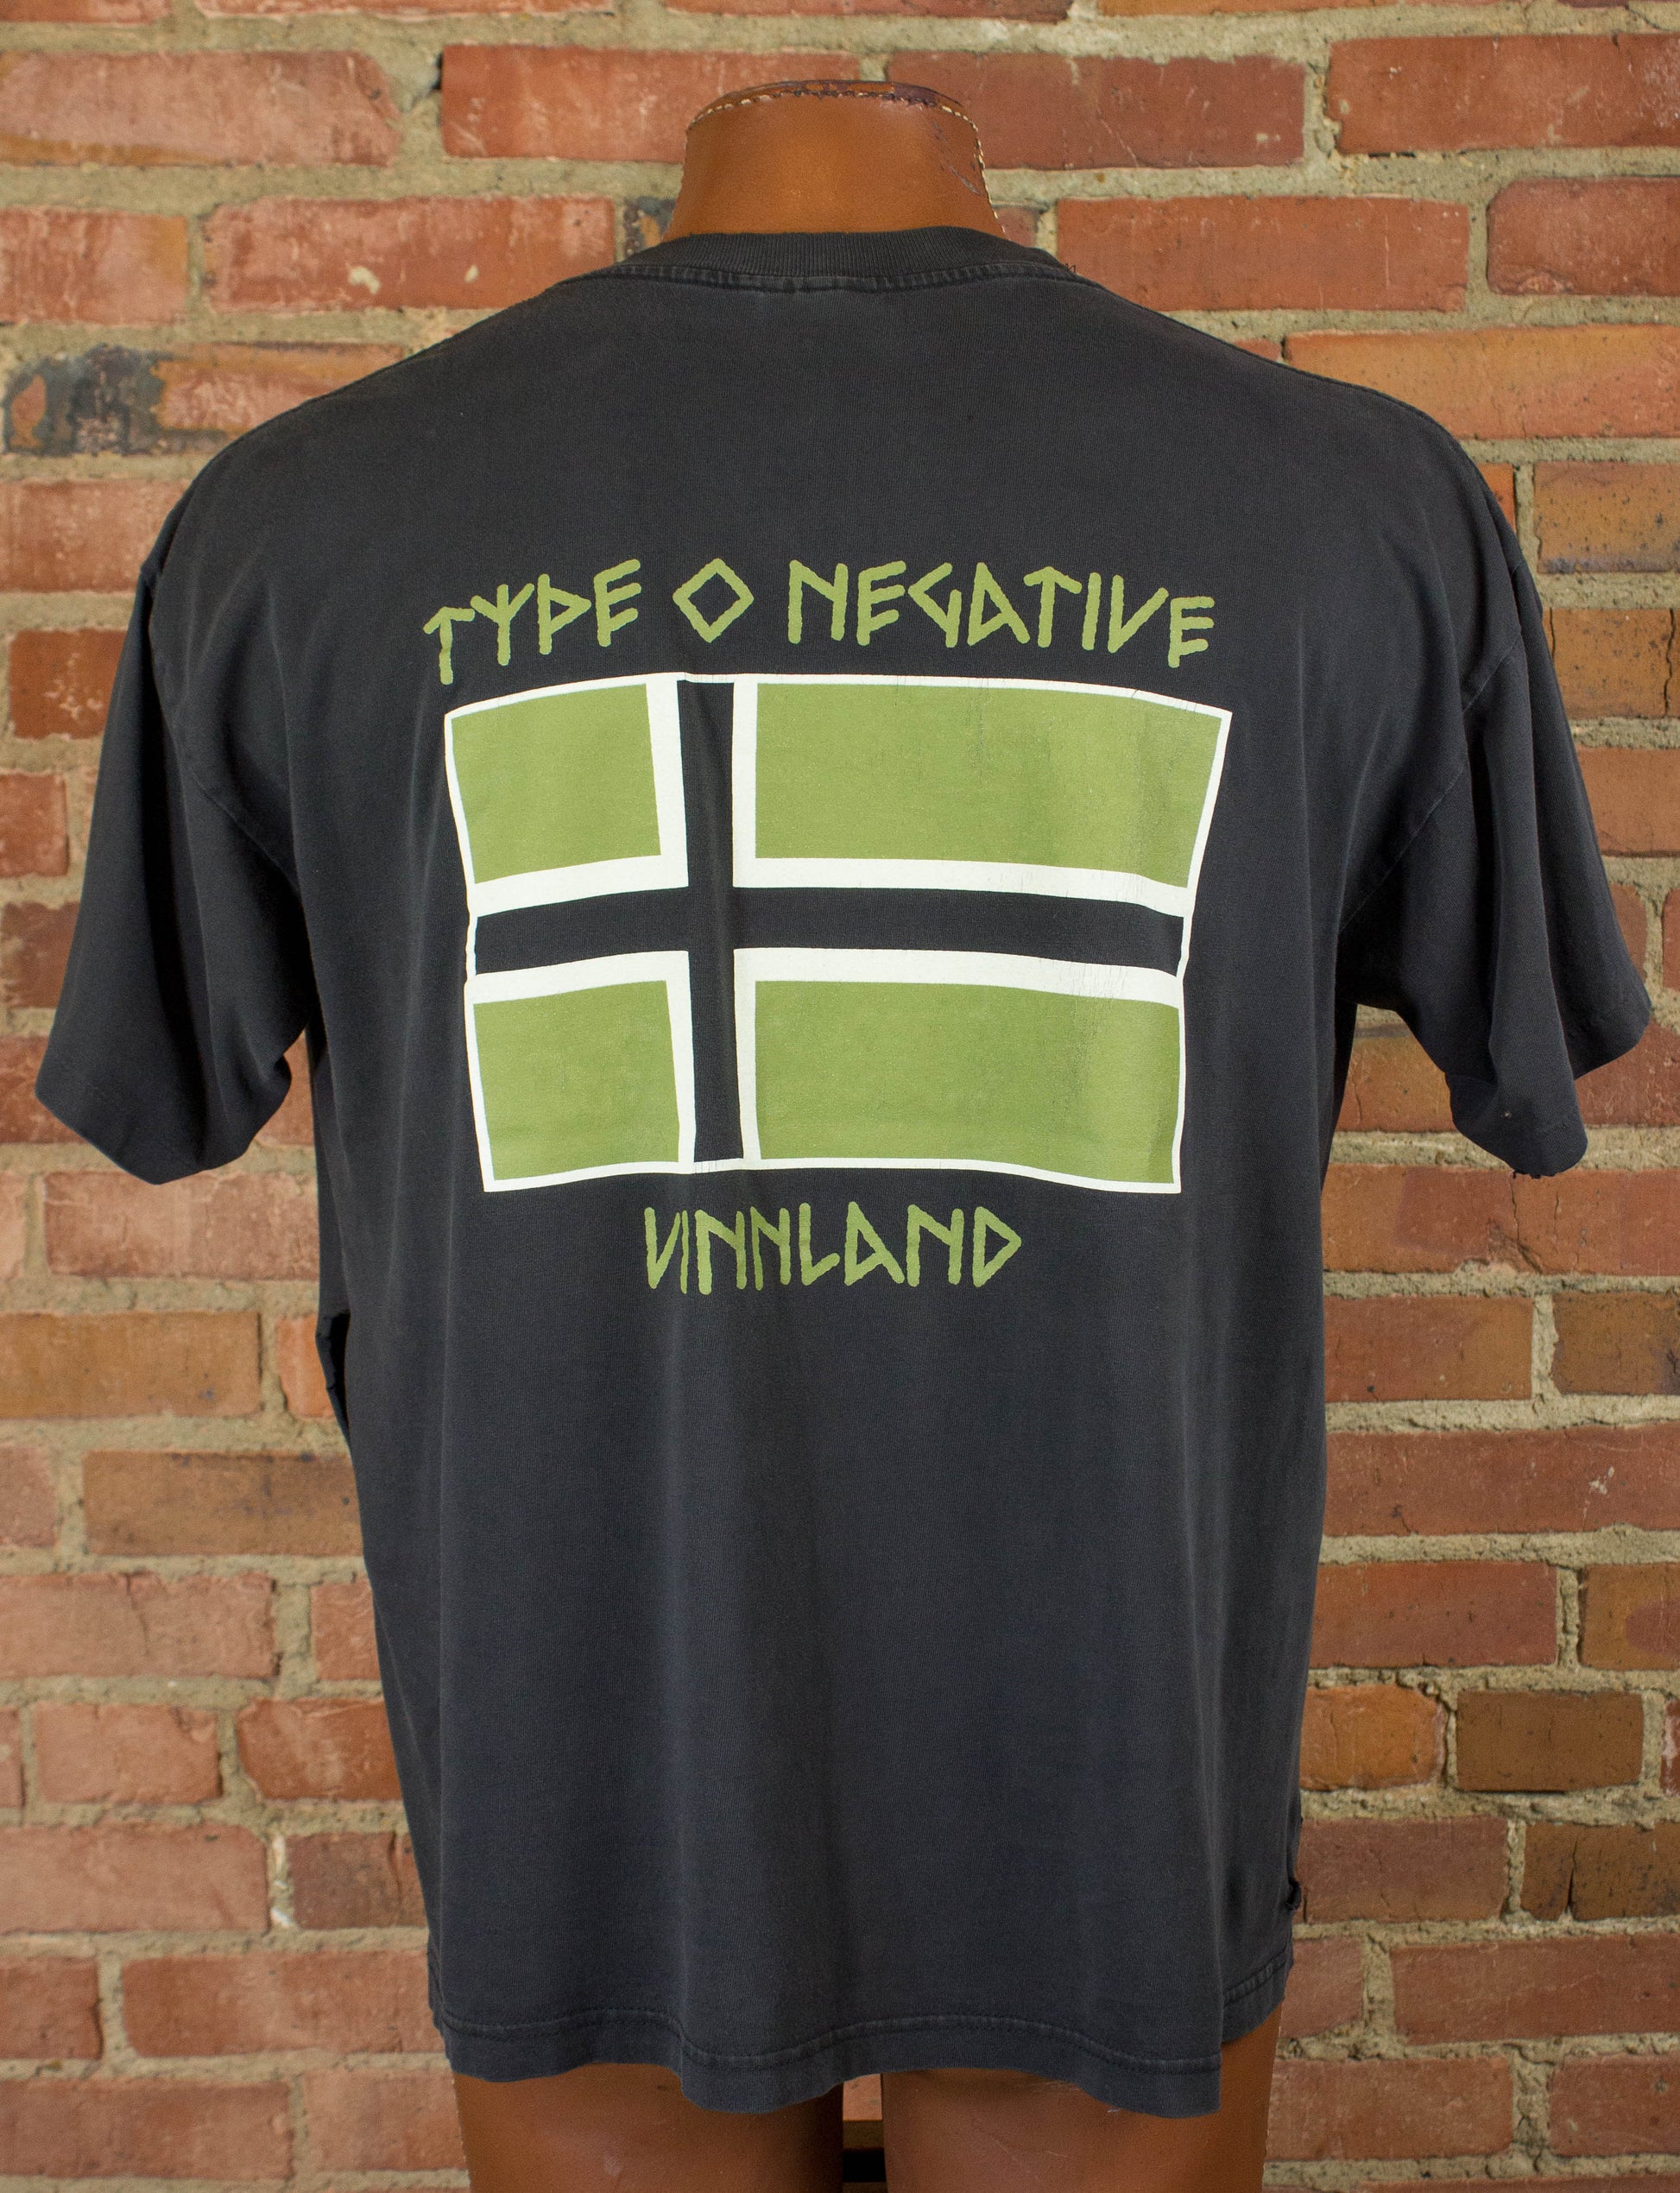 Type O Negative 1996 All You Need Is Blood Vinnland Distressed Black Concert T Shirt Unisex XL